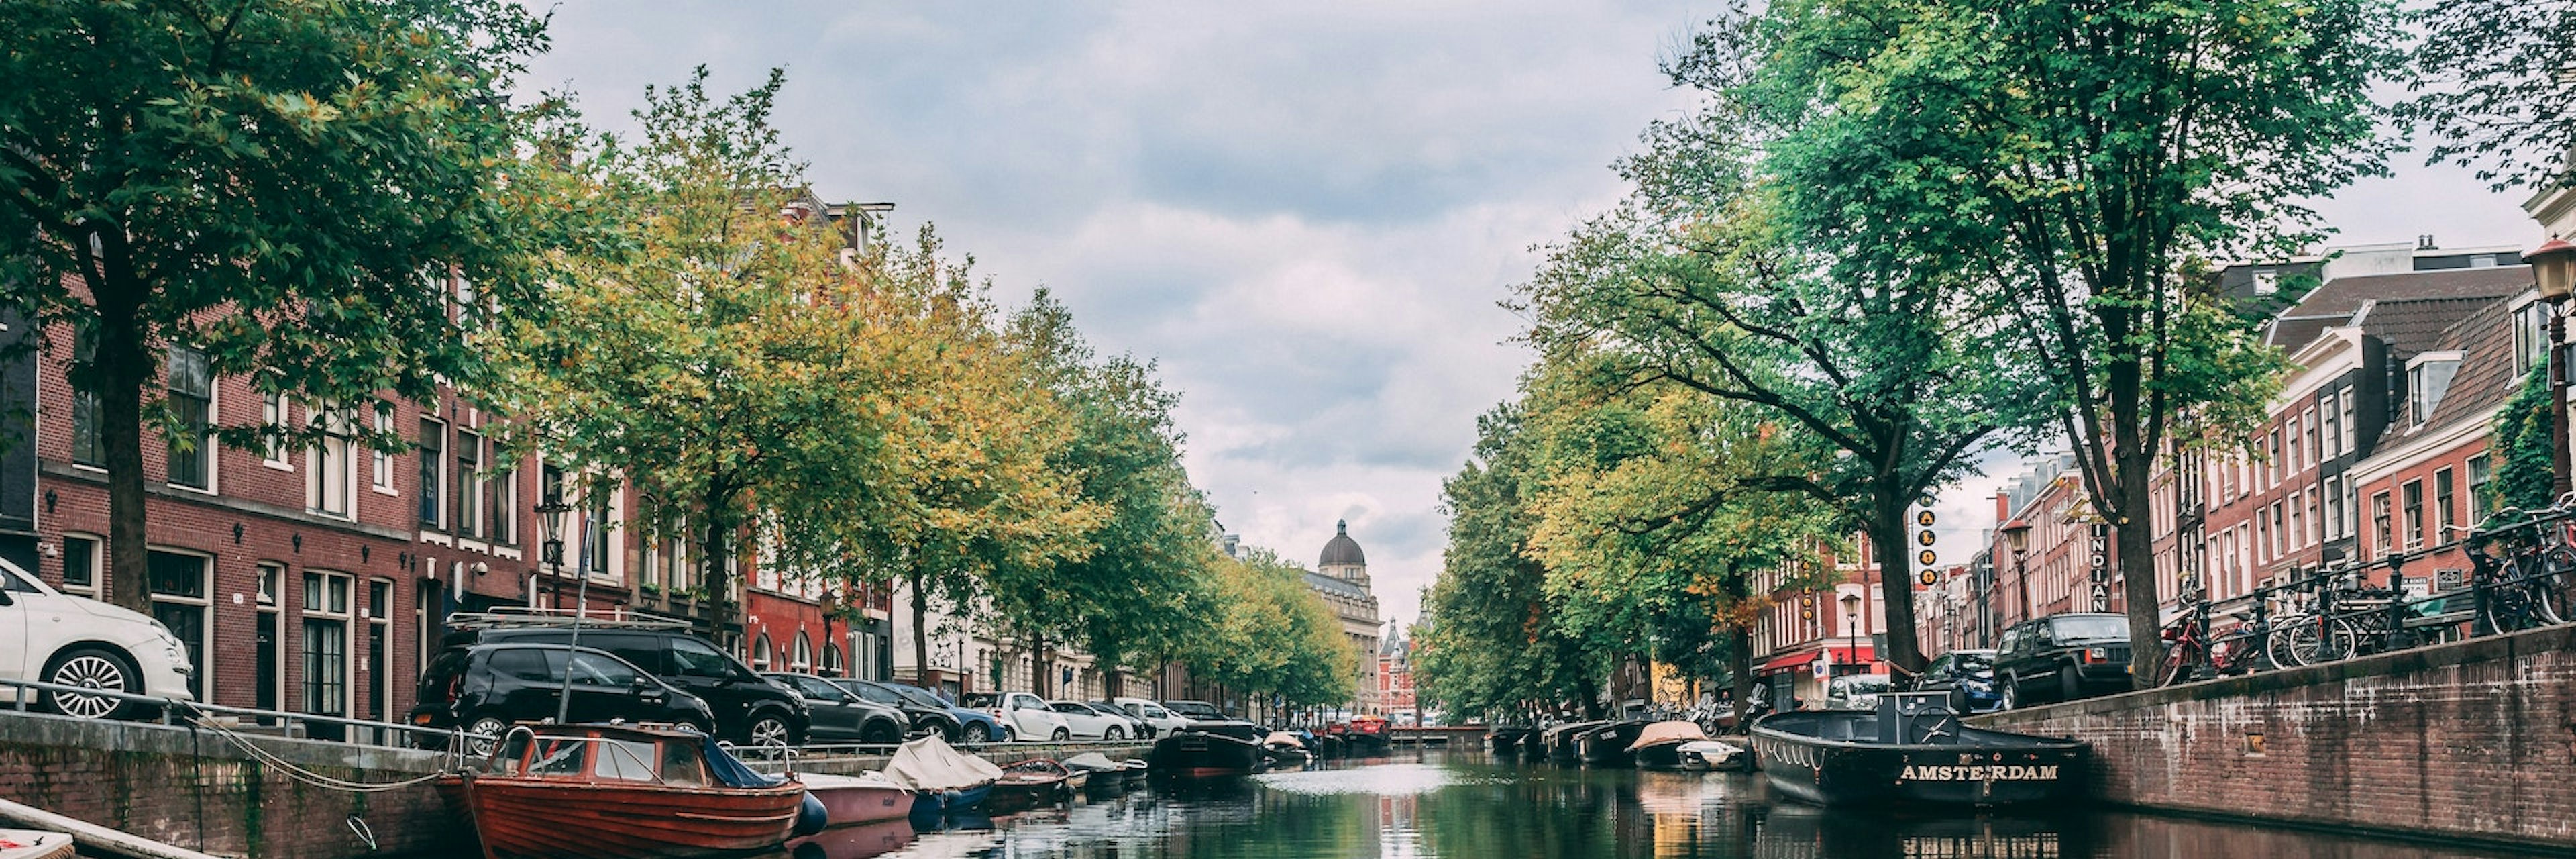 A cityscape of a house-lined canal in Amsterdam